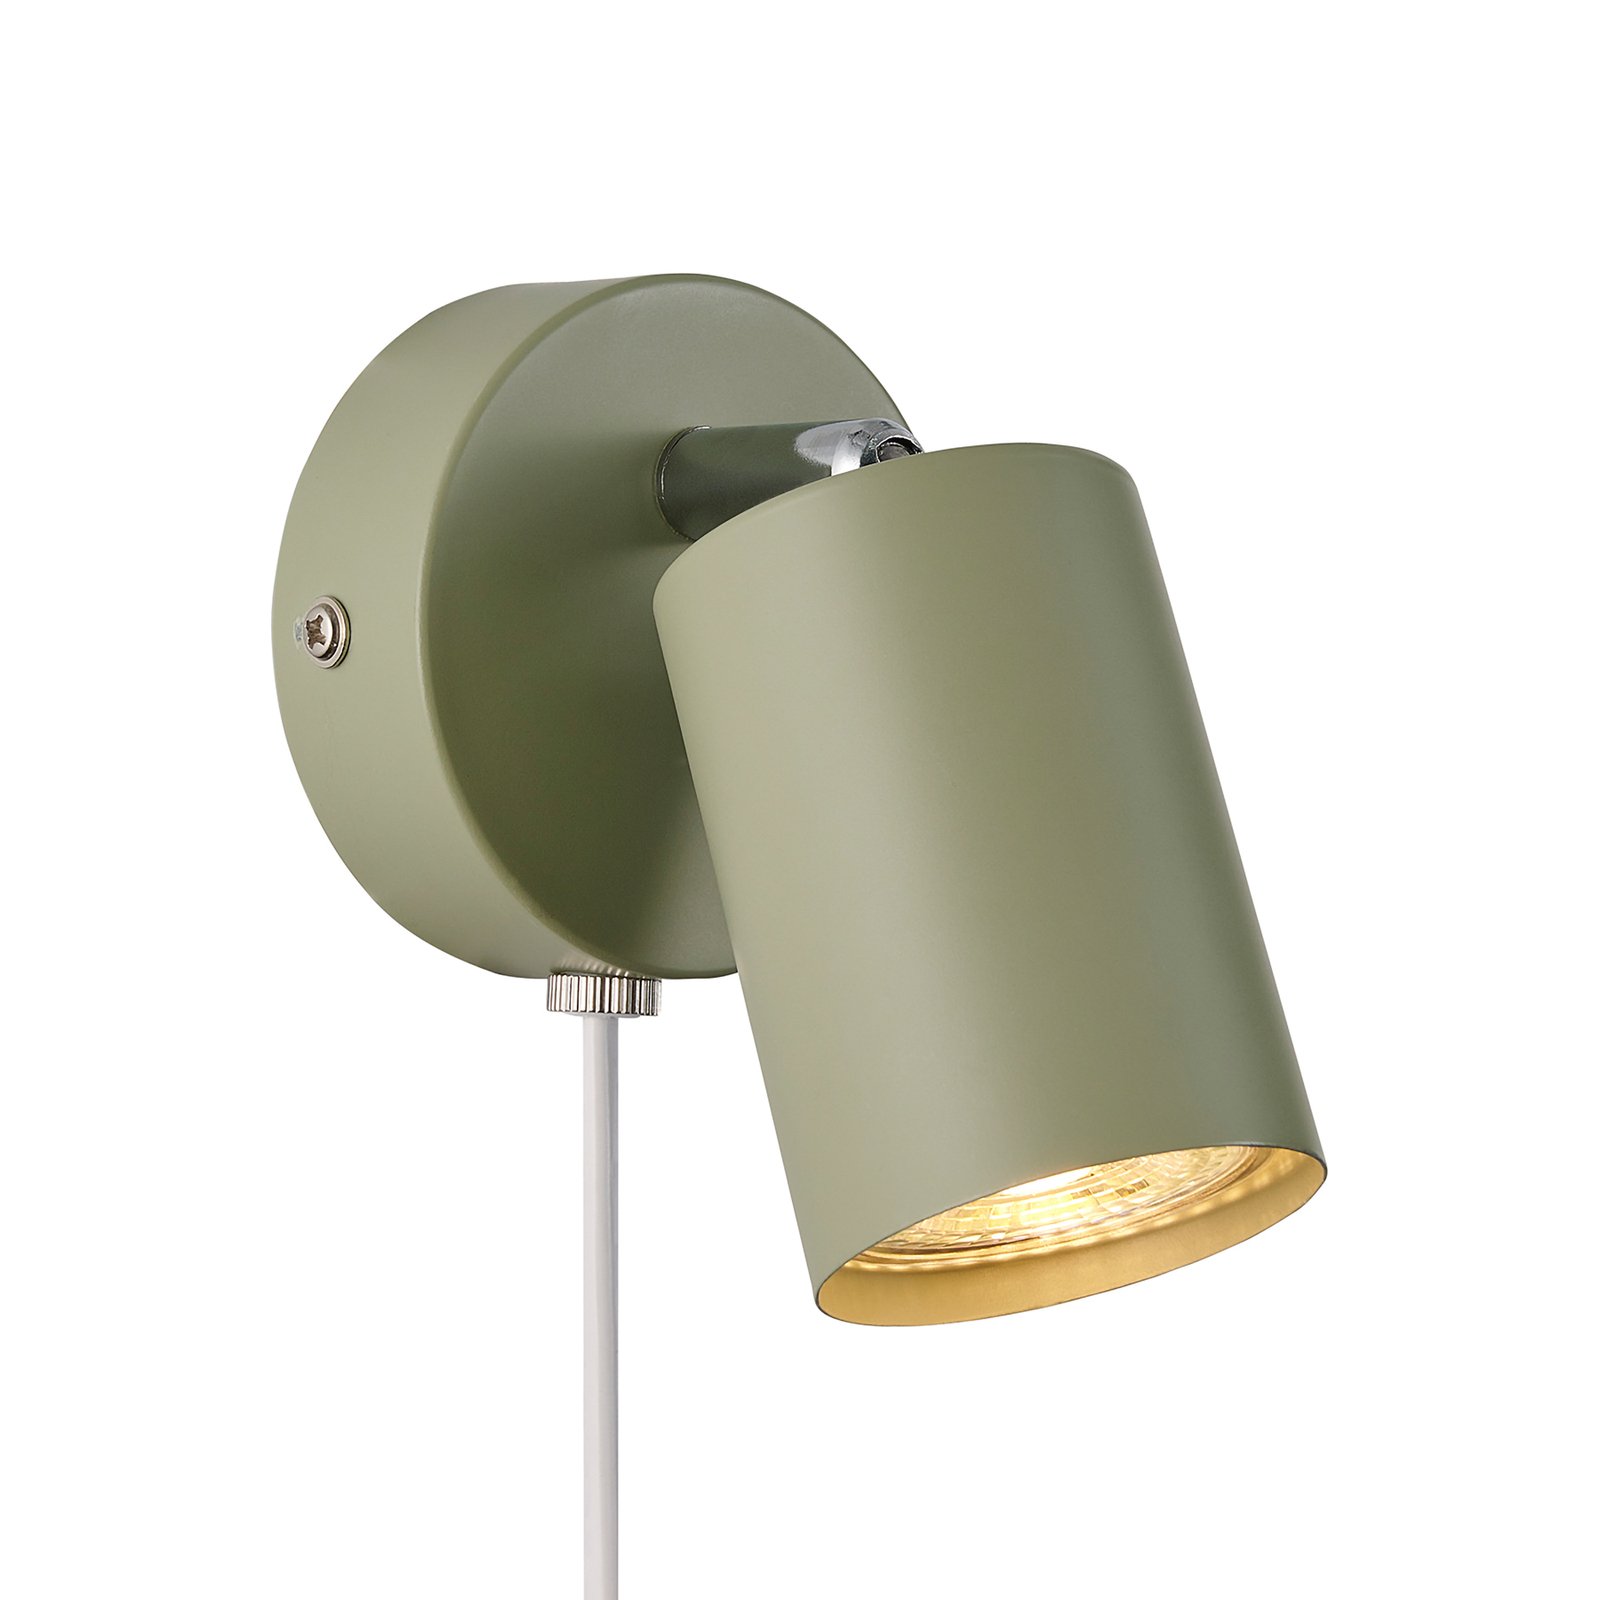 Explore wall spotlight with cable and plug, GU10, green